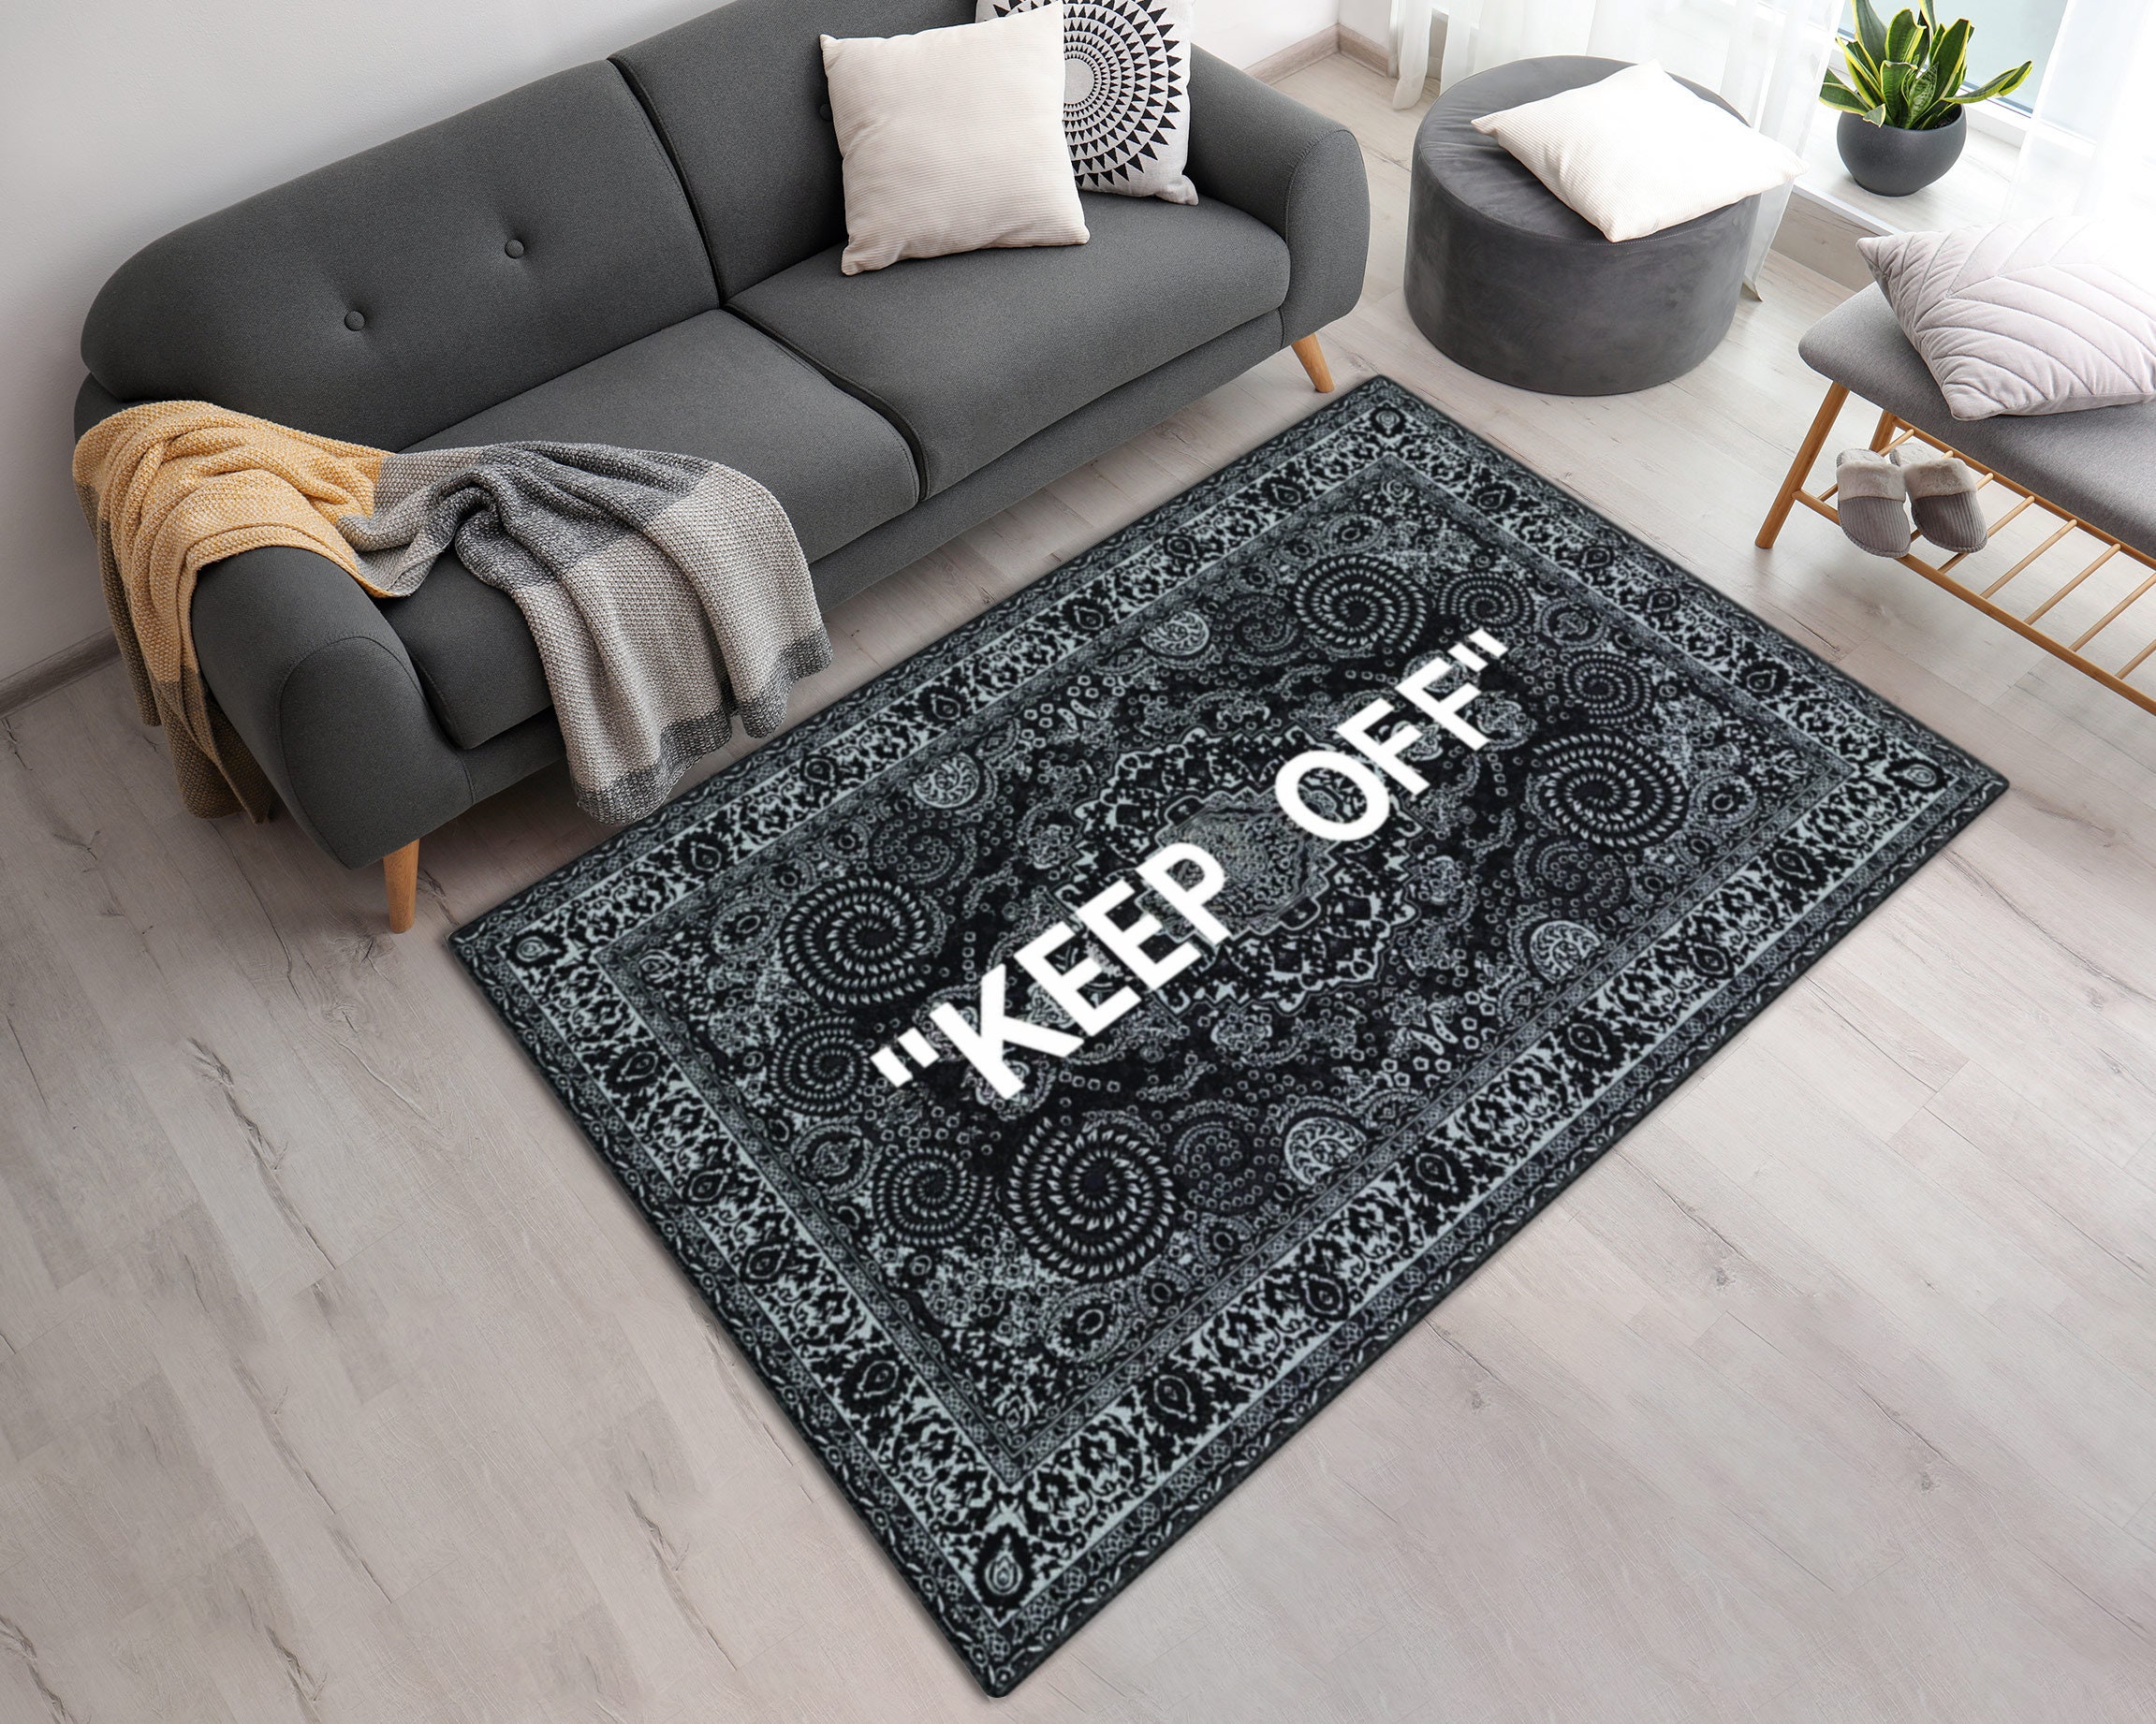 Printed keep Off Area Rug With Persian Design Washable keep Off Area Carpet  Home Decor -  Hong Kong